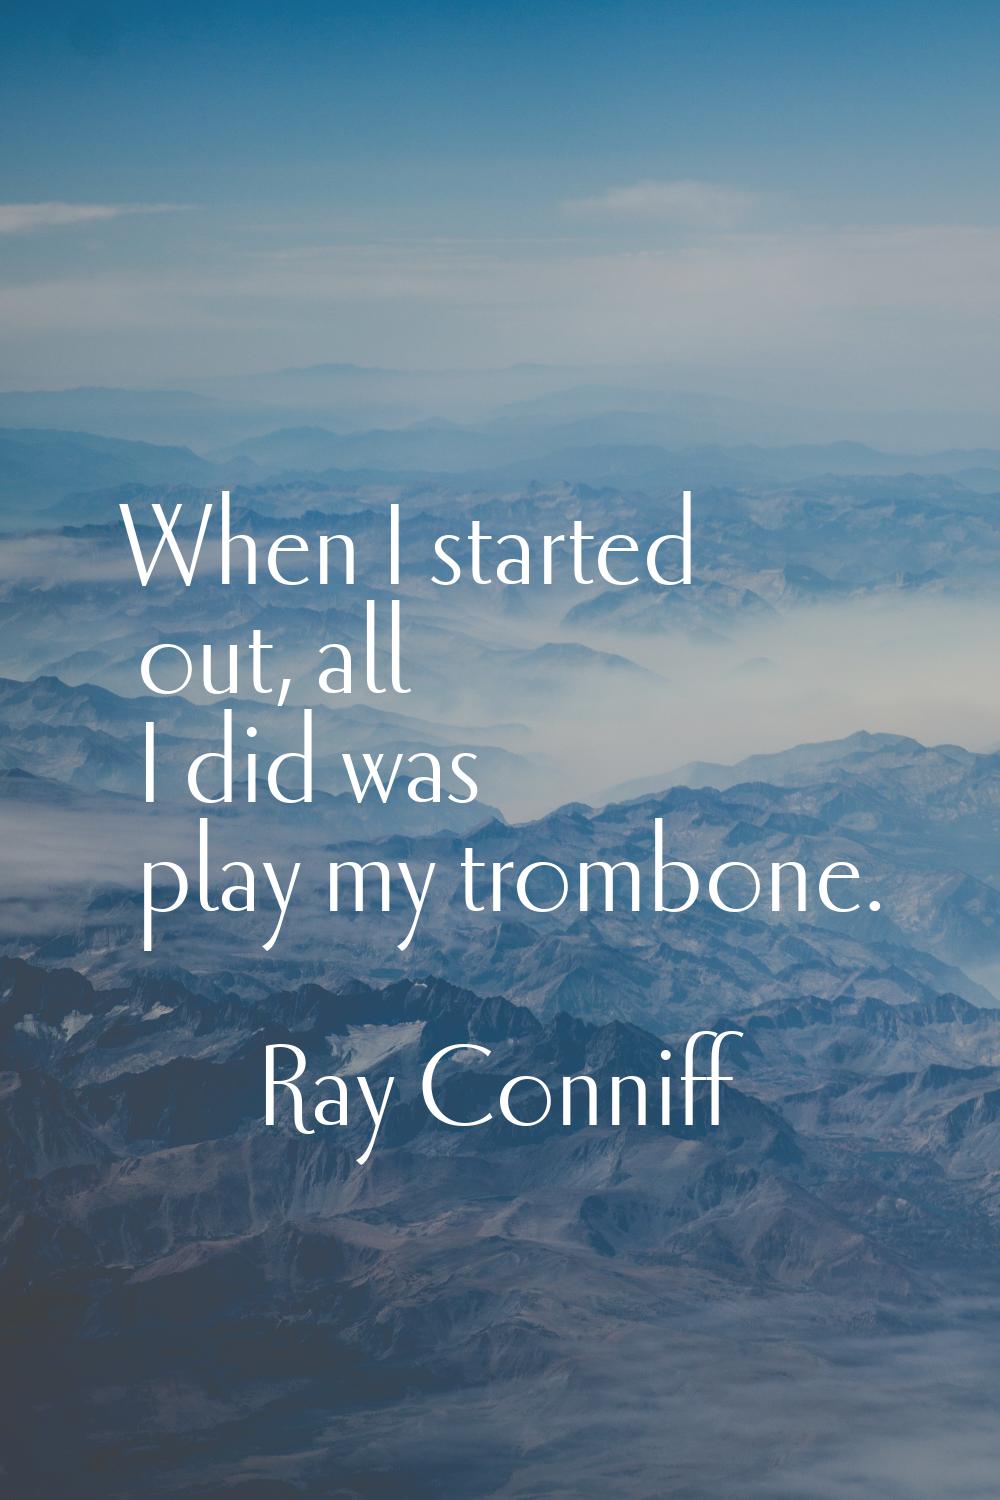 When I started out, all I did was play my trombone.